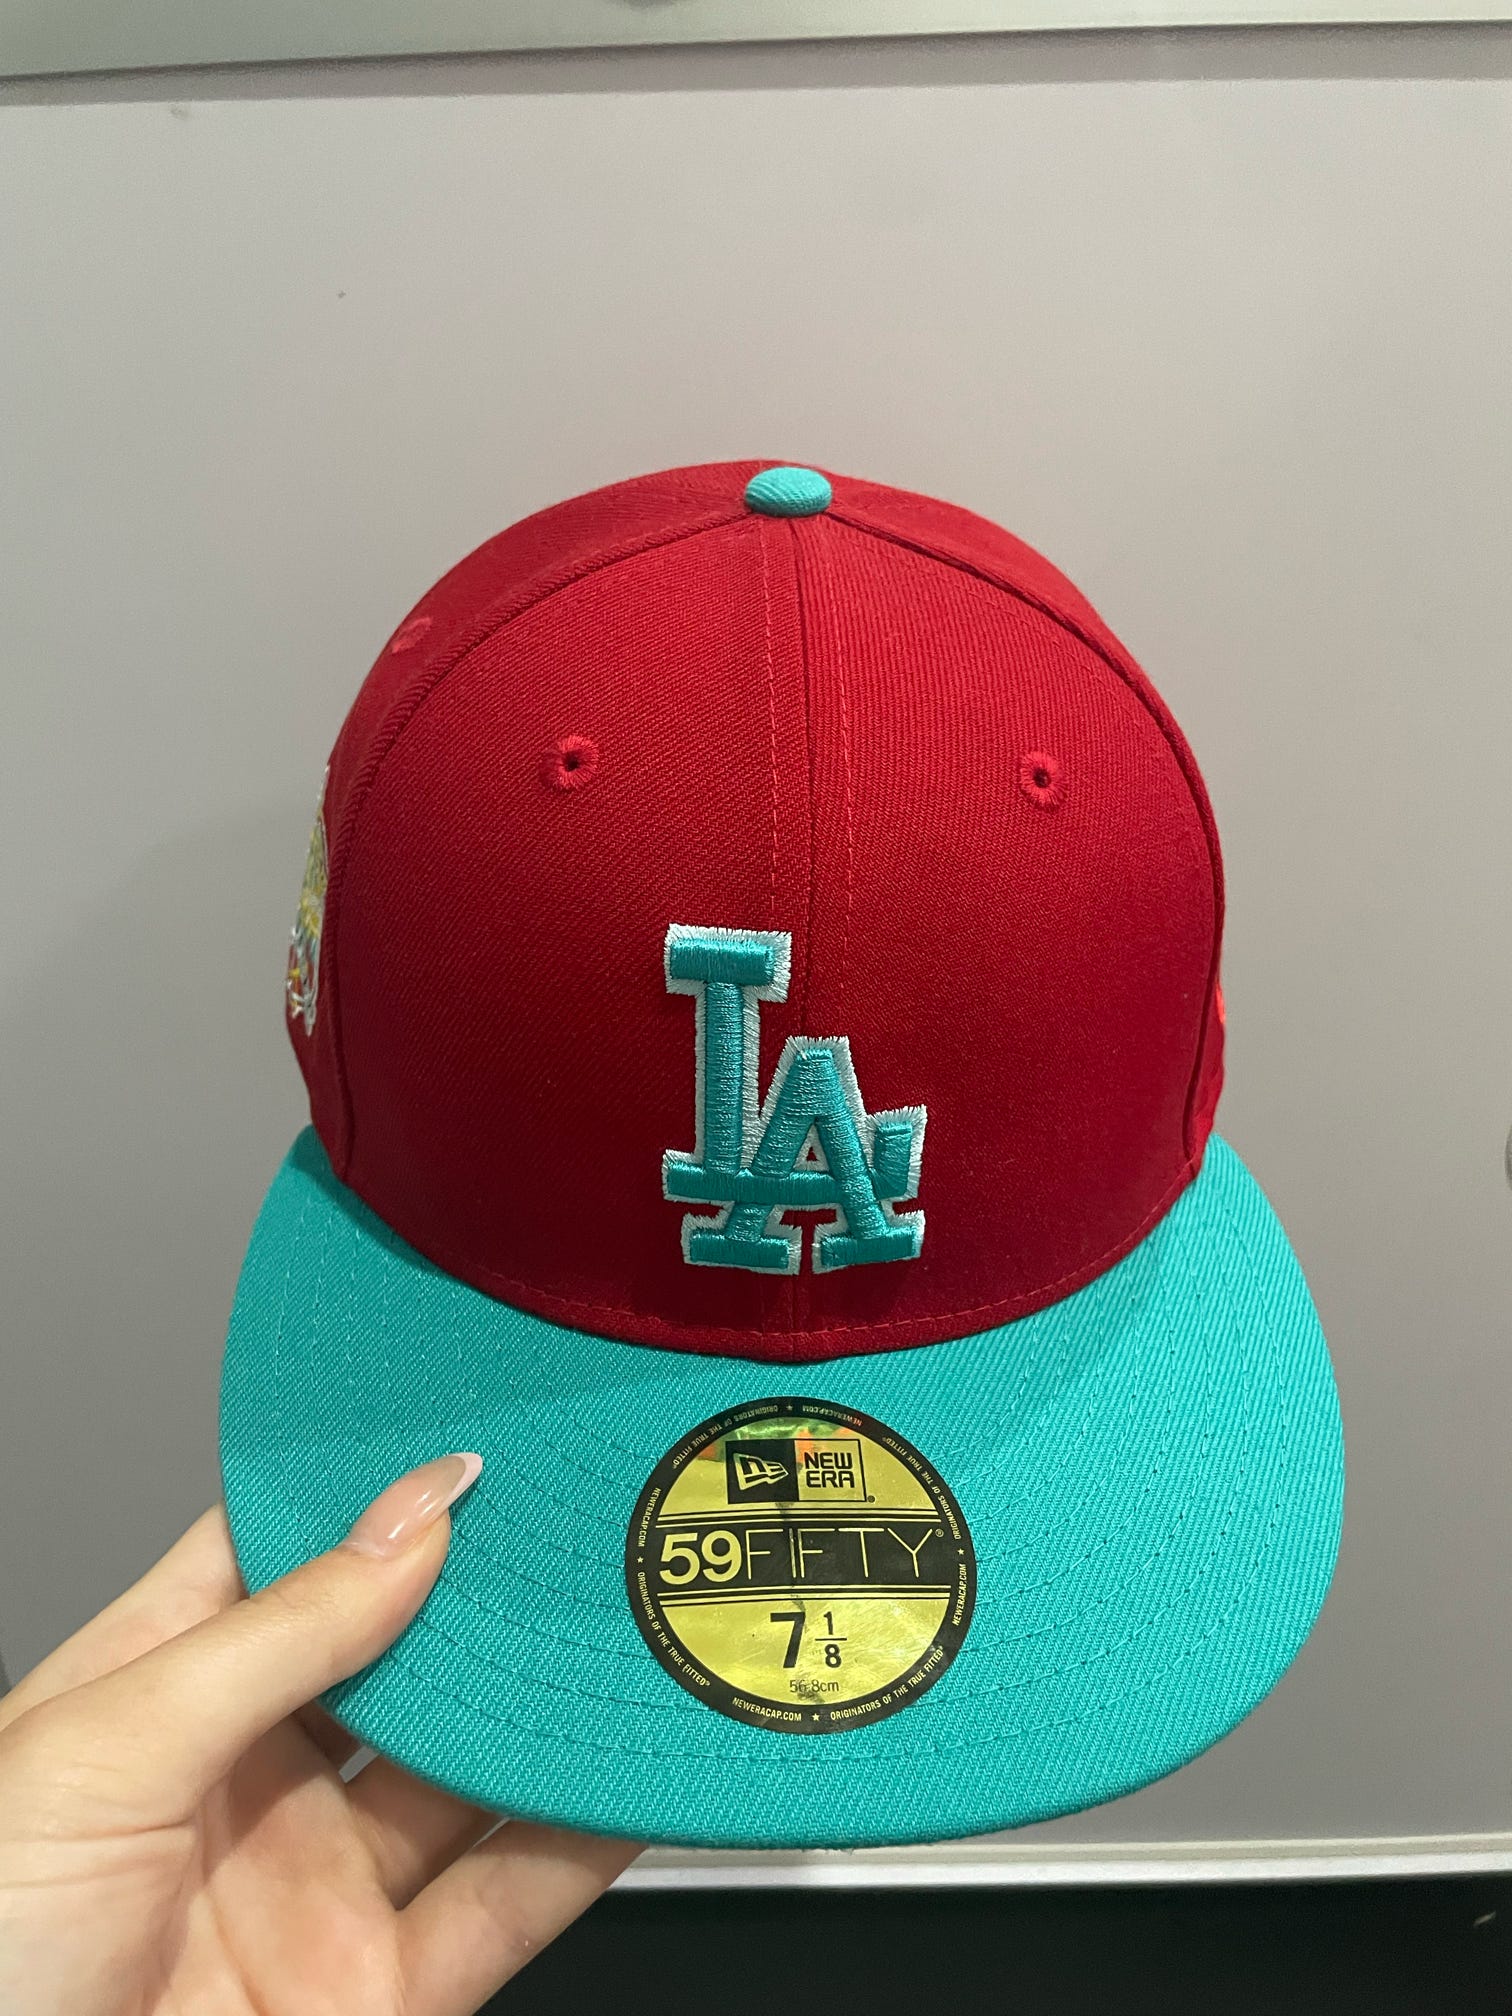 New Era 59Fifty Captain Planet 2.0 Los Angeles Dodgers 40th Anniversary Patch Hat - Red, Teal - Supra Sneakers